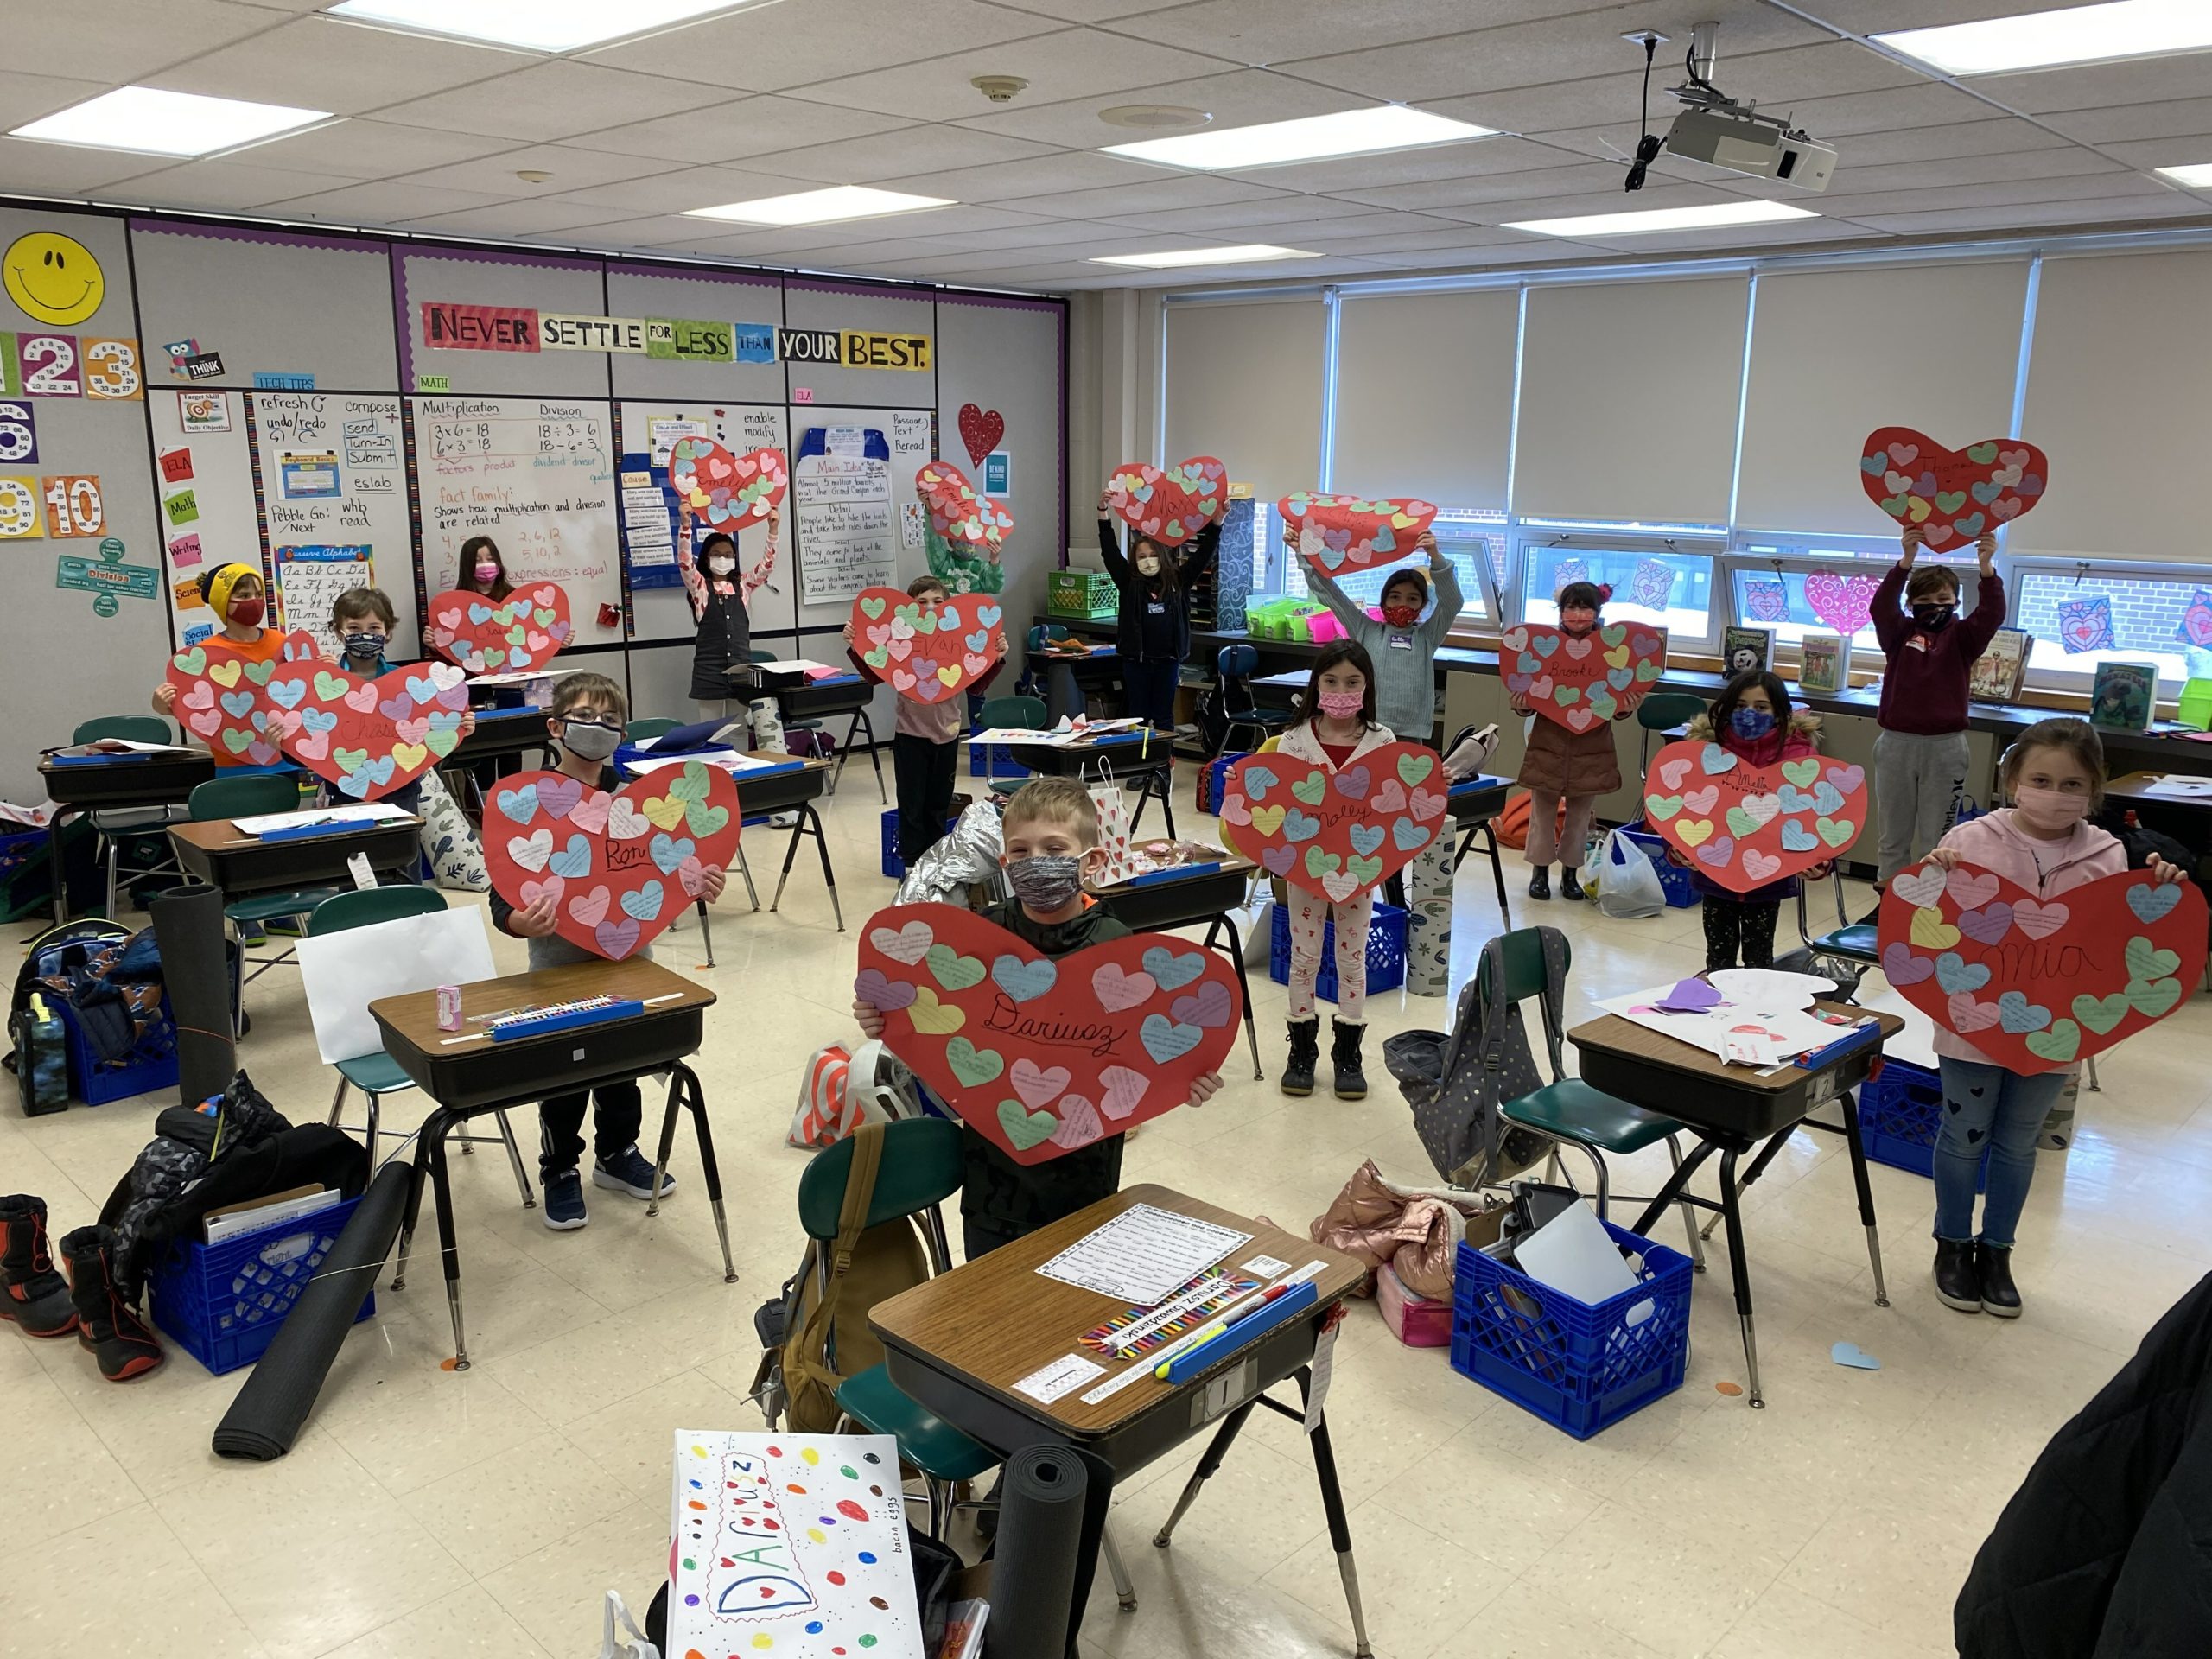 To spread the love for Valentine’s Day, Rosalie Gilhauley’s third grade class at Westhampton Beach Elementary School made collages out of life-size paper candy hearts. The students adorned the hearts with messages of kindness that they wrote to each other.